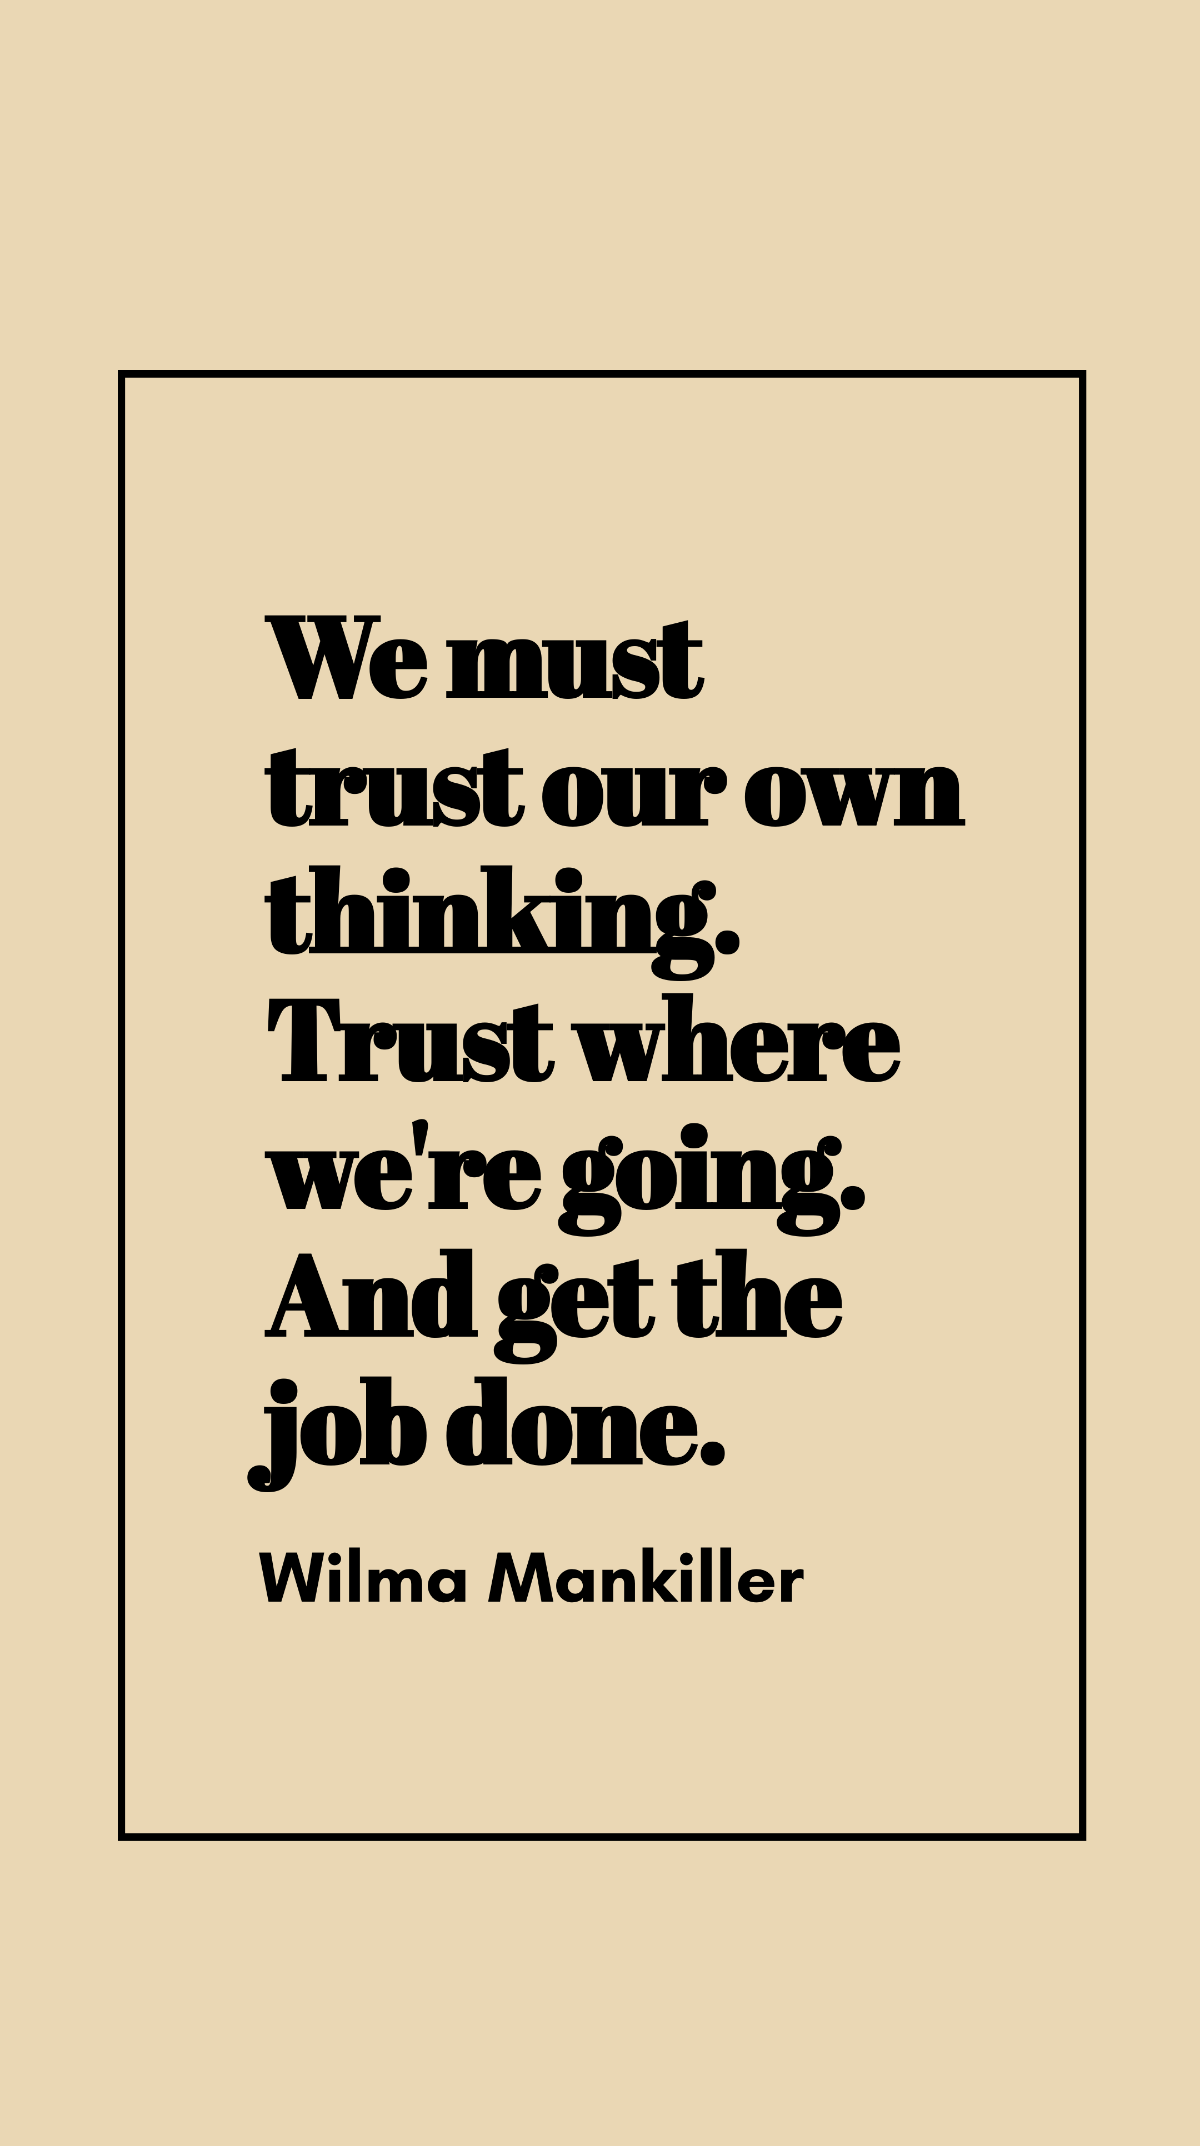 Wilma Mankiller - We must trust our own thinking. Trust where we're going. And get the job done.